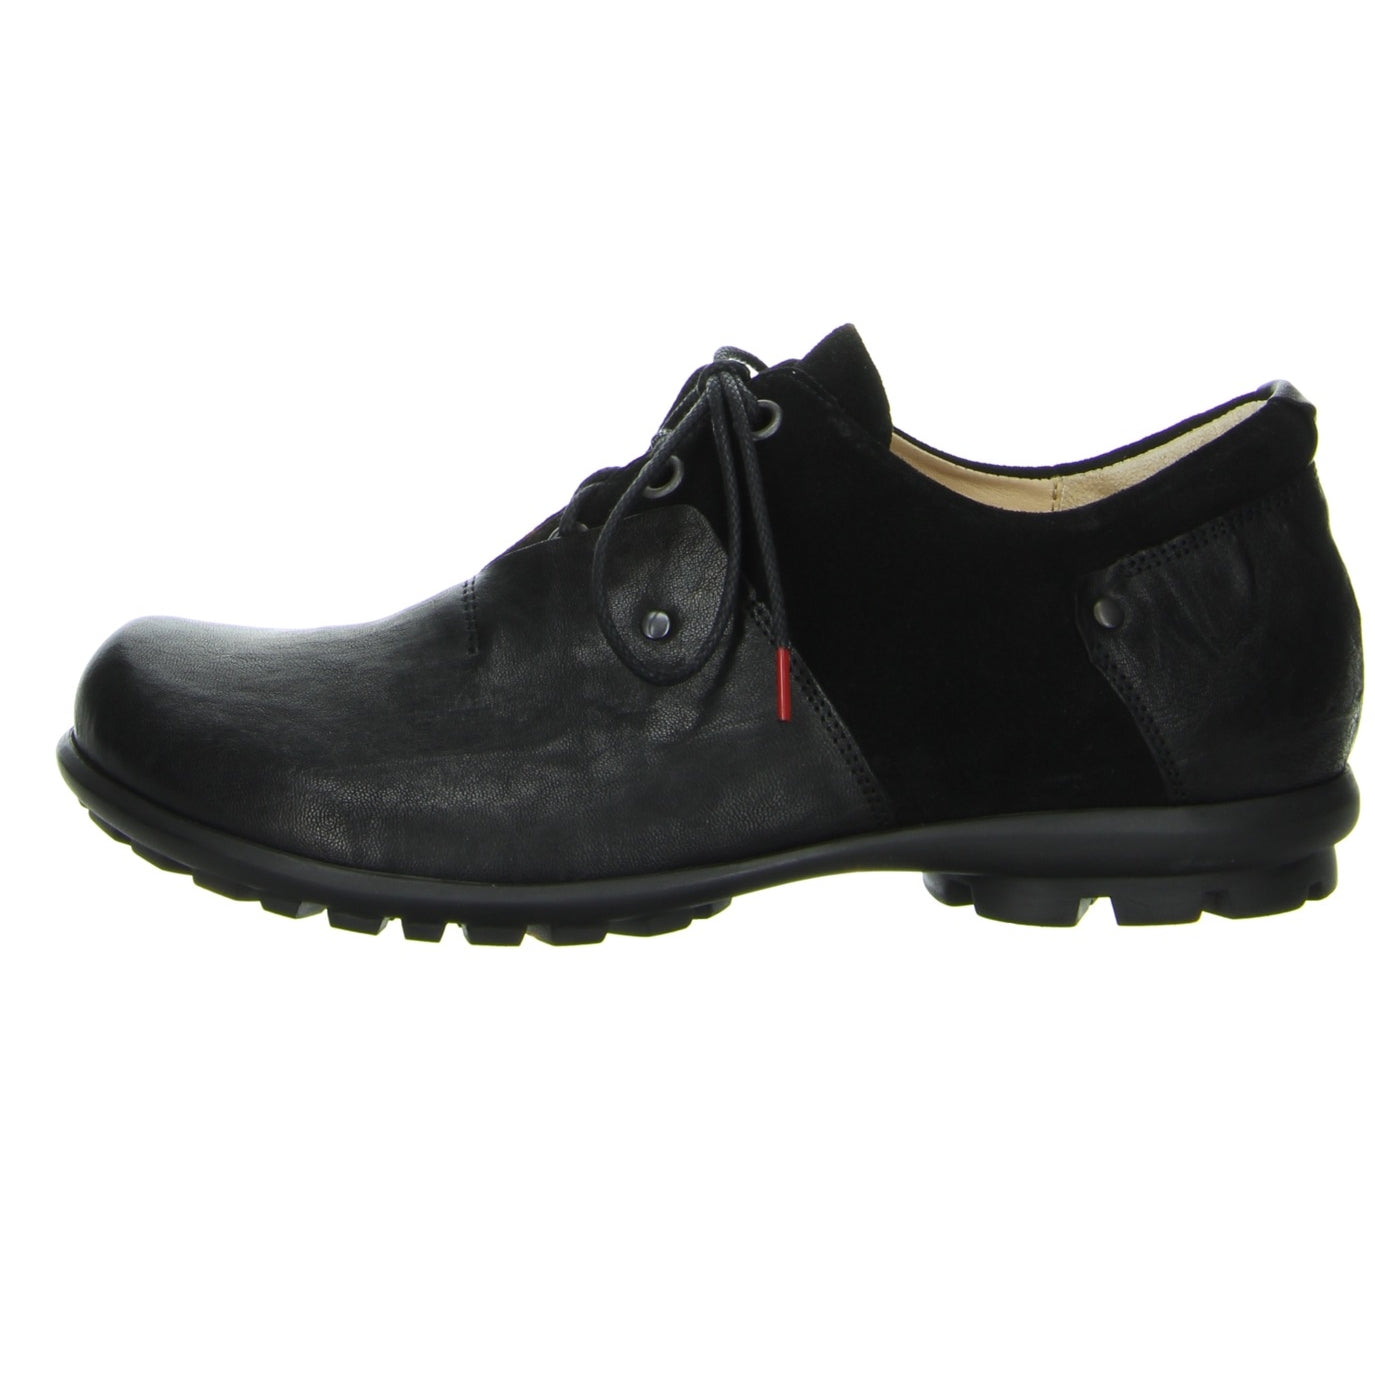 Think Shoes USA KONG Lace Up Shoes - Black 88651-09